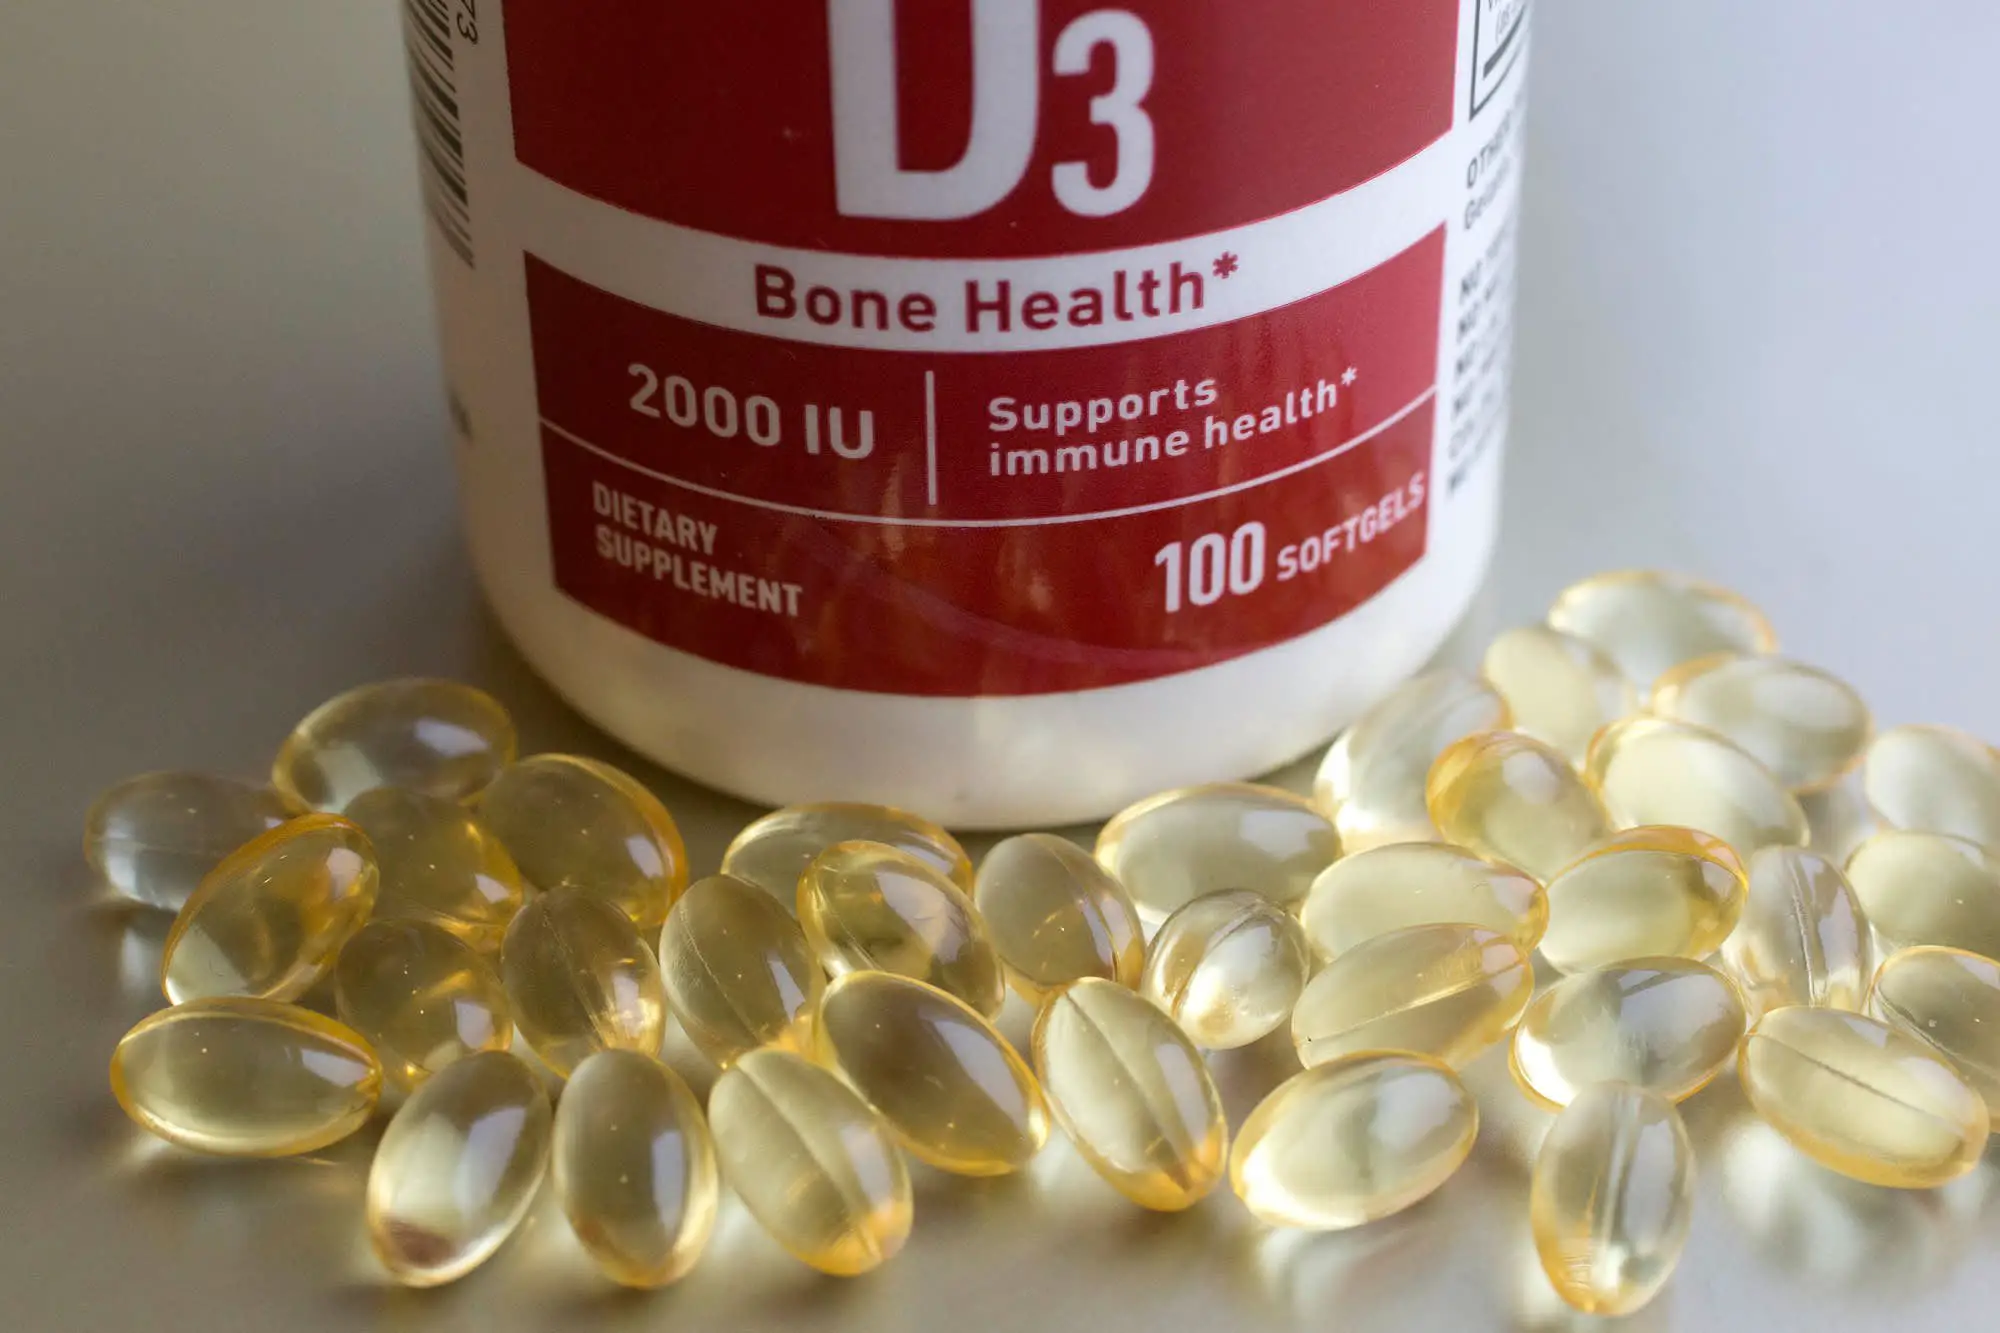 Your vitamin D tests and supplements are probably a waste of money